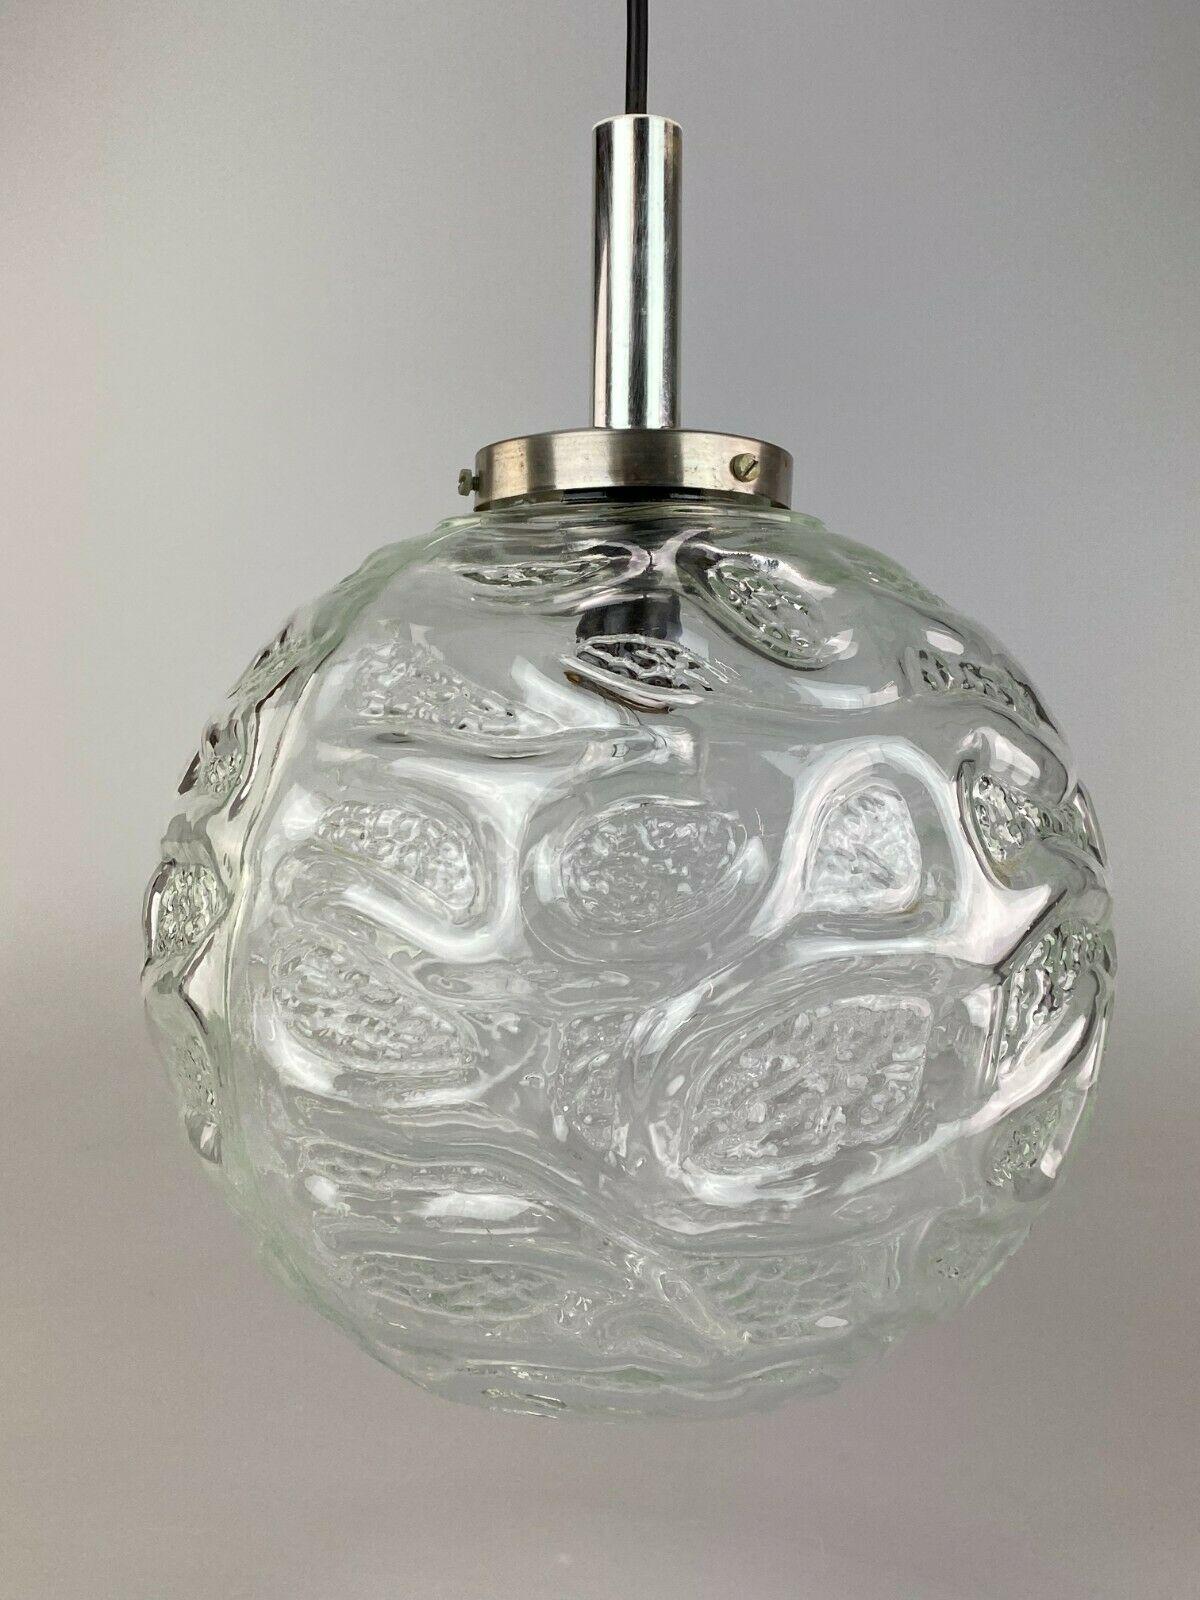 European 60s 70s Ball Lamp Hanging Lamp Glass Ceiling Lamp Space Age Design For Sale